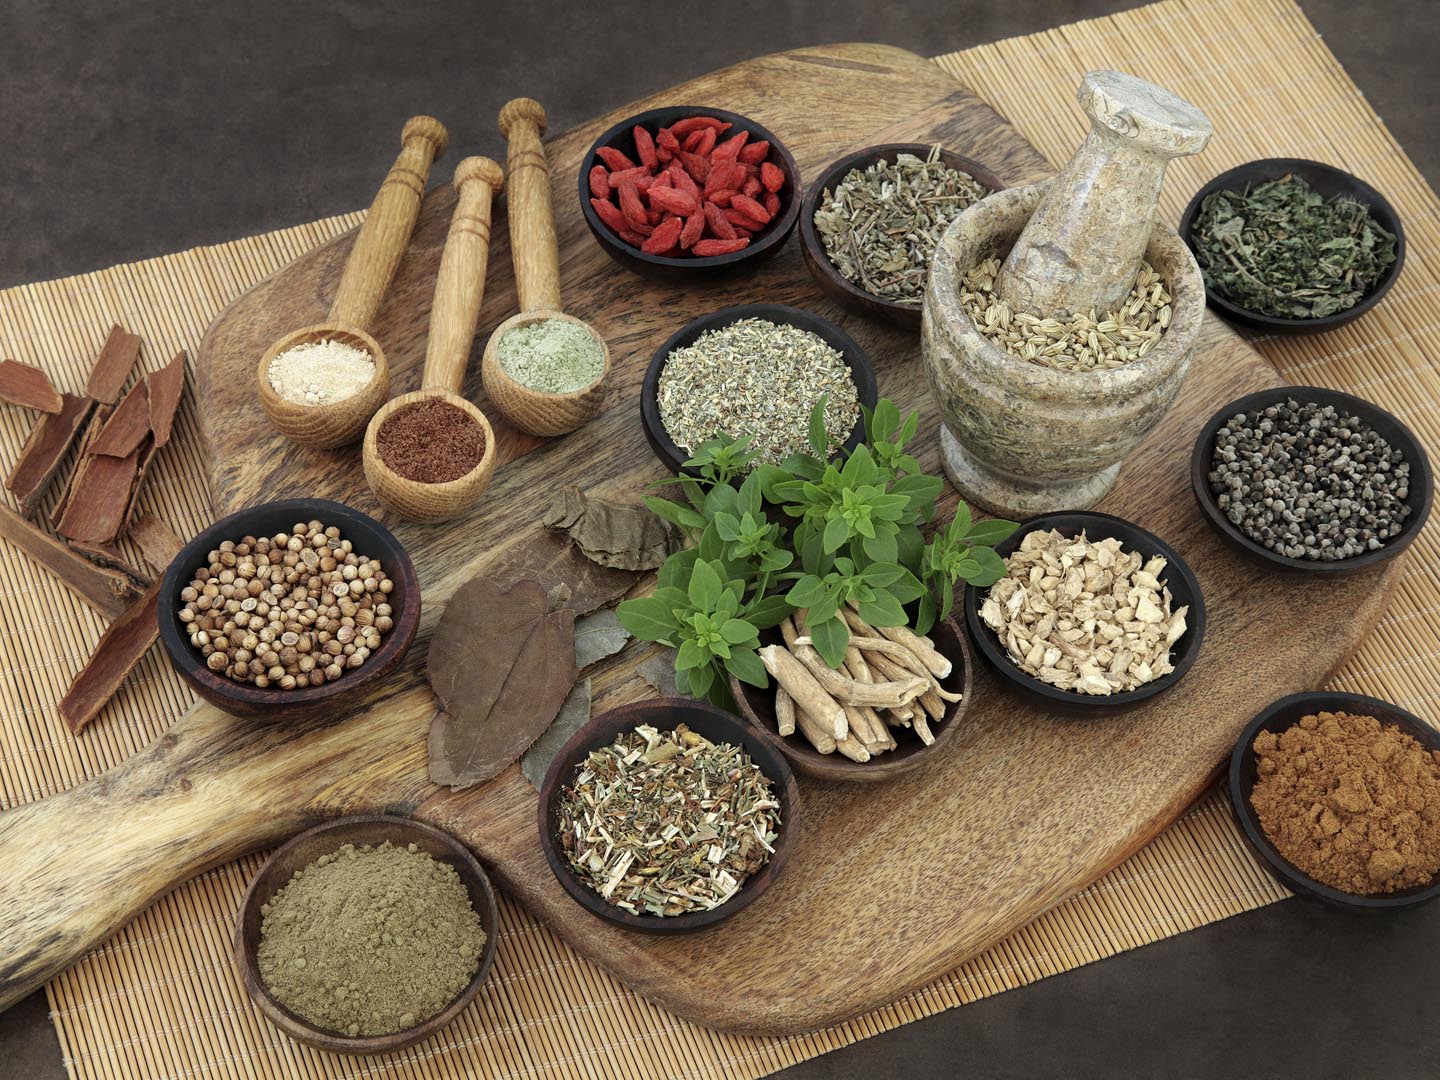 Cooking with Spices for Flavor and Health - UMMS Health